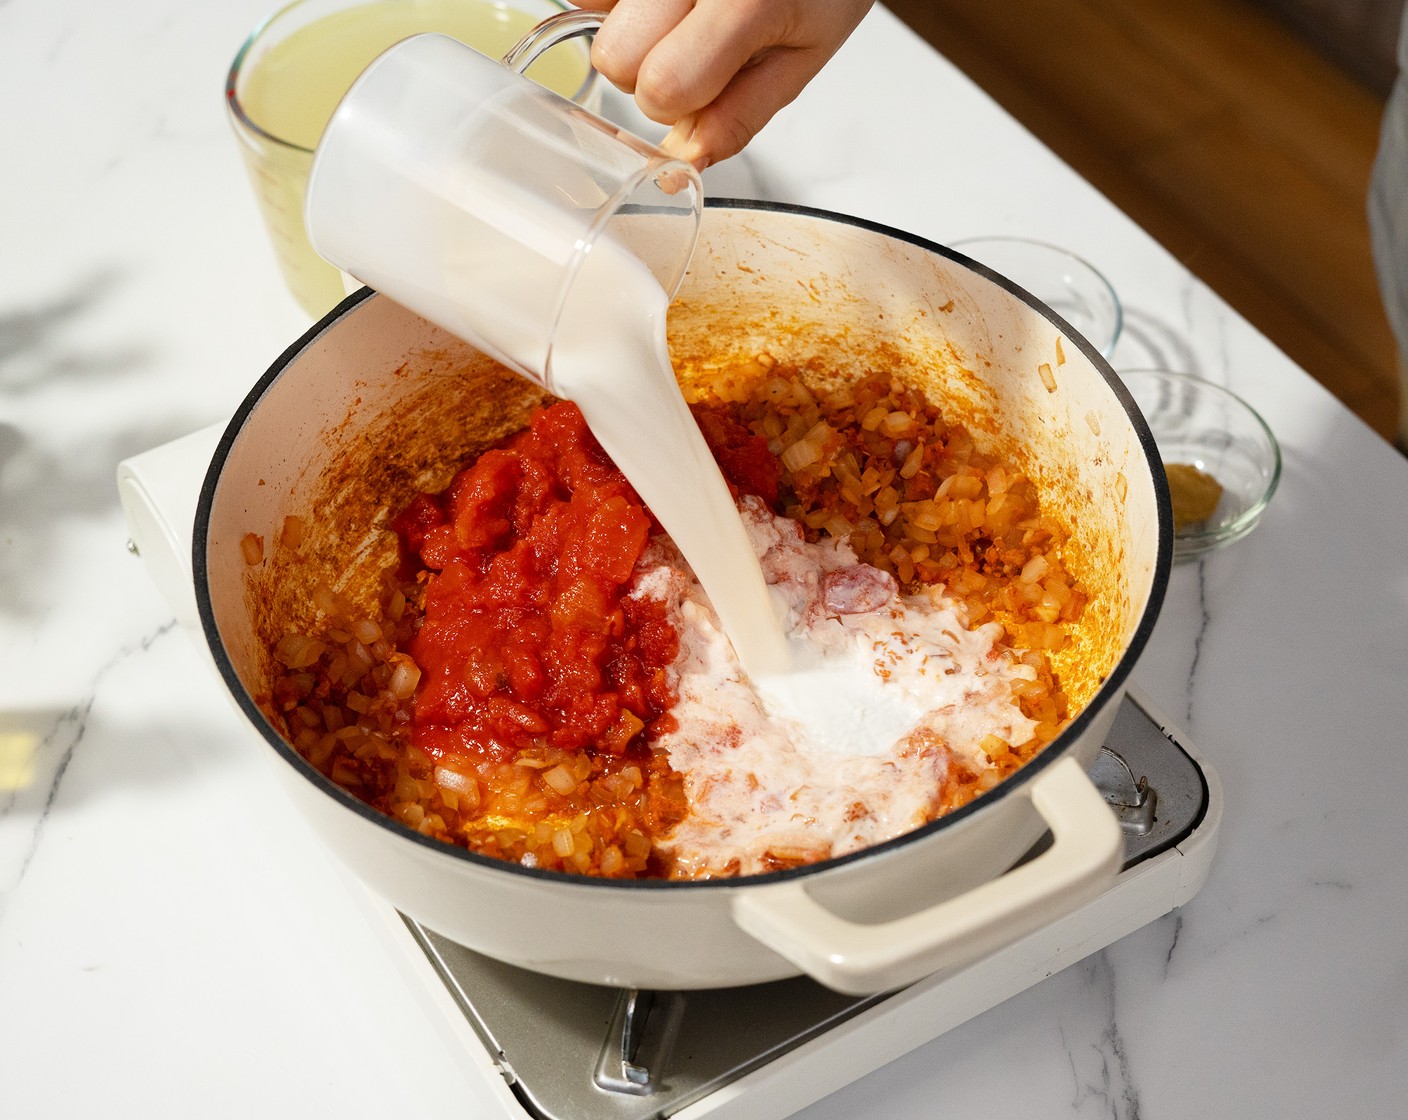 step 4 Add Diced Tomatoes (1 can), Milk (1/2 cup), Chicken Broth (4 cups), Dijon Mustard (1/2 Tbsp), and Worcestershire Sauce (1 tsp). Stir to pull up everything from the bottom. Bring to a boil and then lower to a simmer and cook for 10 minutes.